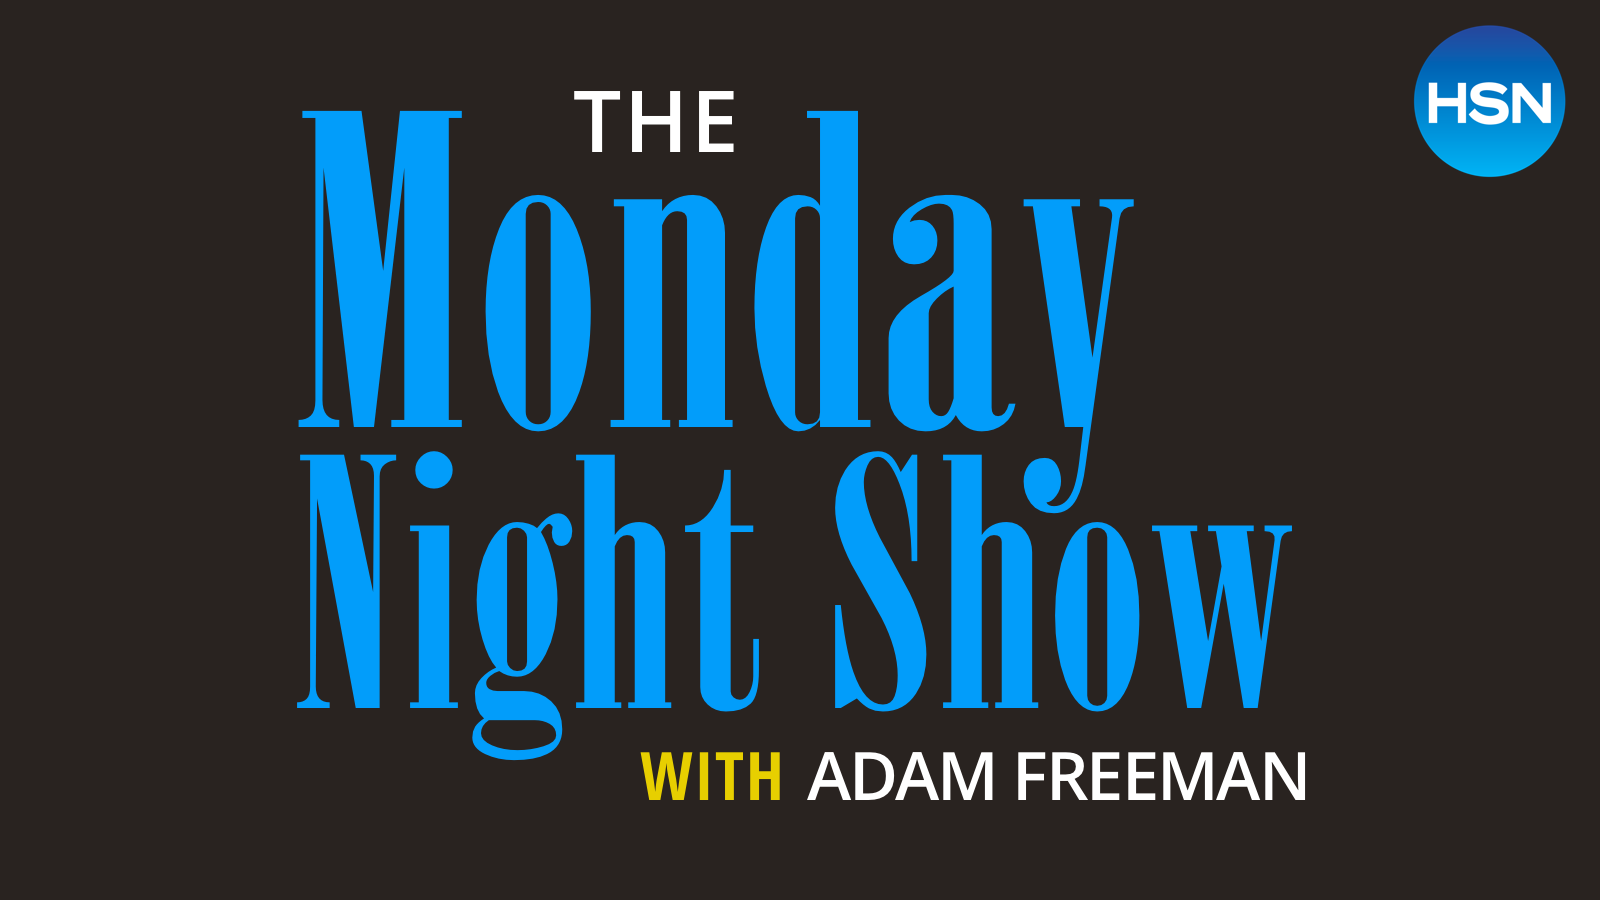 The Monday Night Show